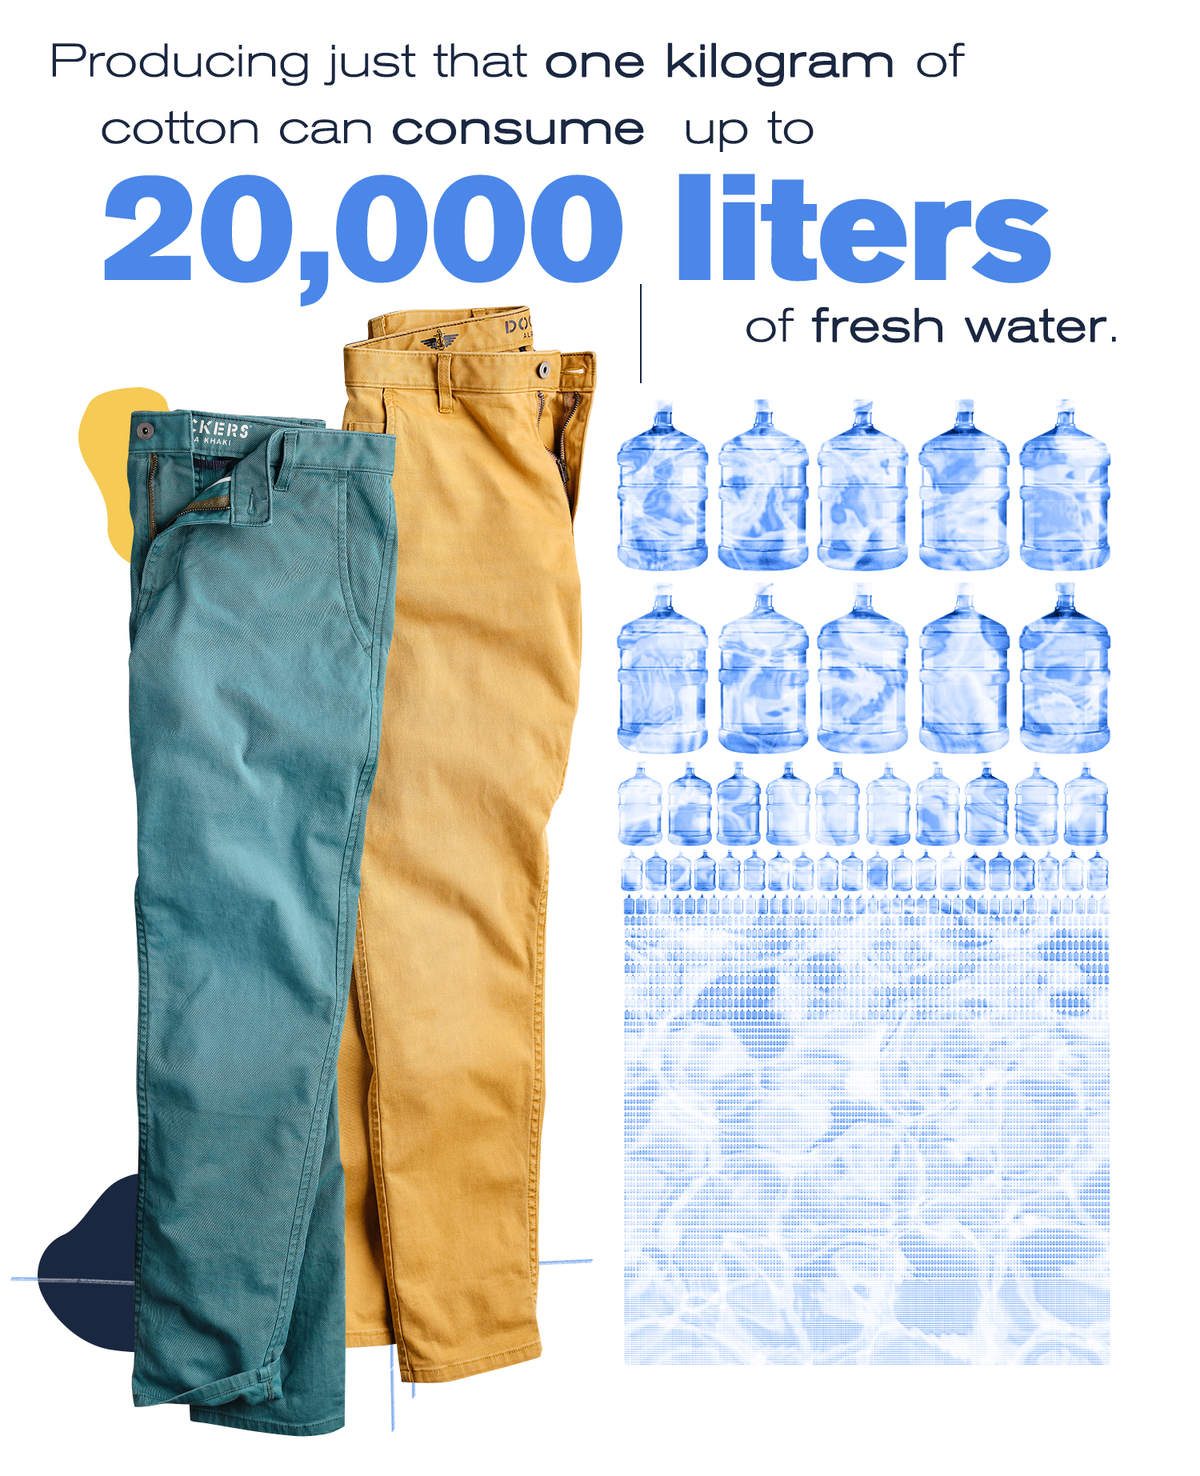 Graphic of khaki pants with text that reads: “Producing just one kilogram of cotton can consume up to 20,000 liters, or 5,300 gallons of fresh water.”